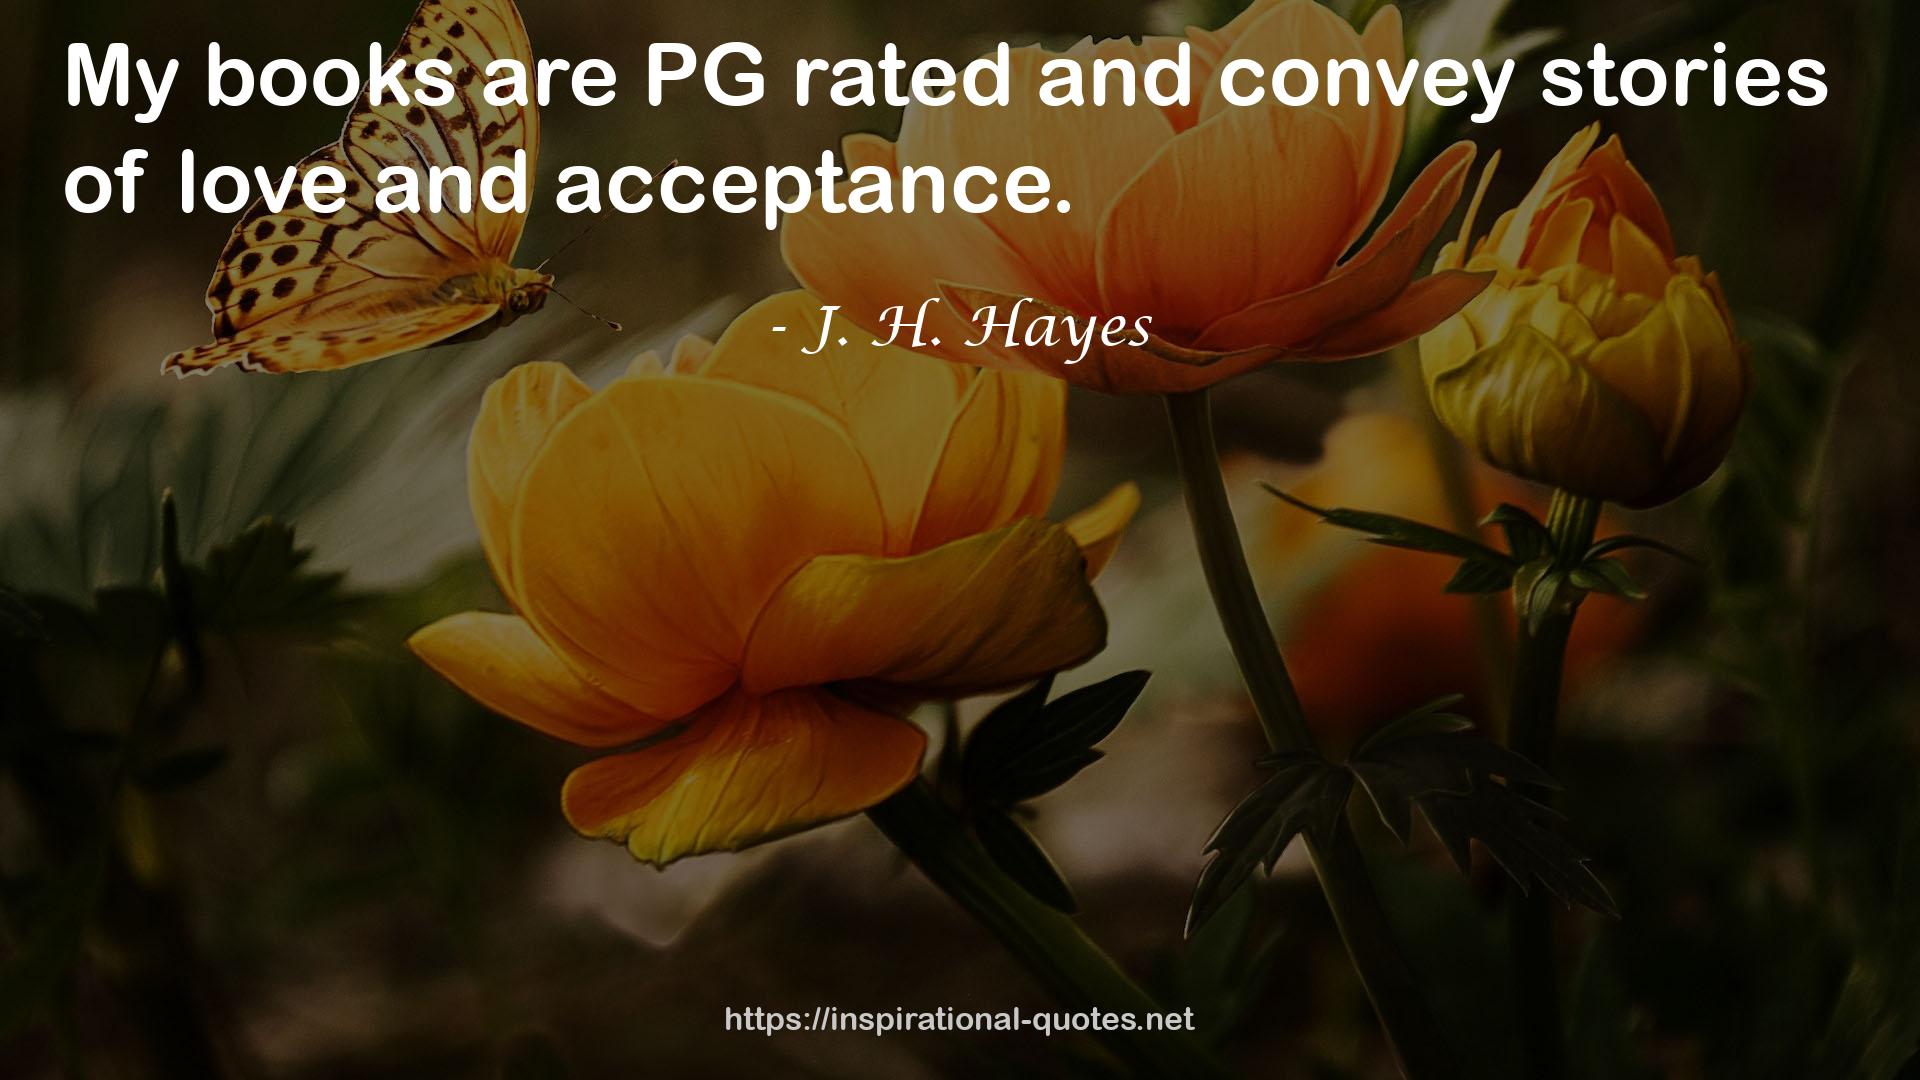 J. H. Hayes QUOTES